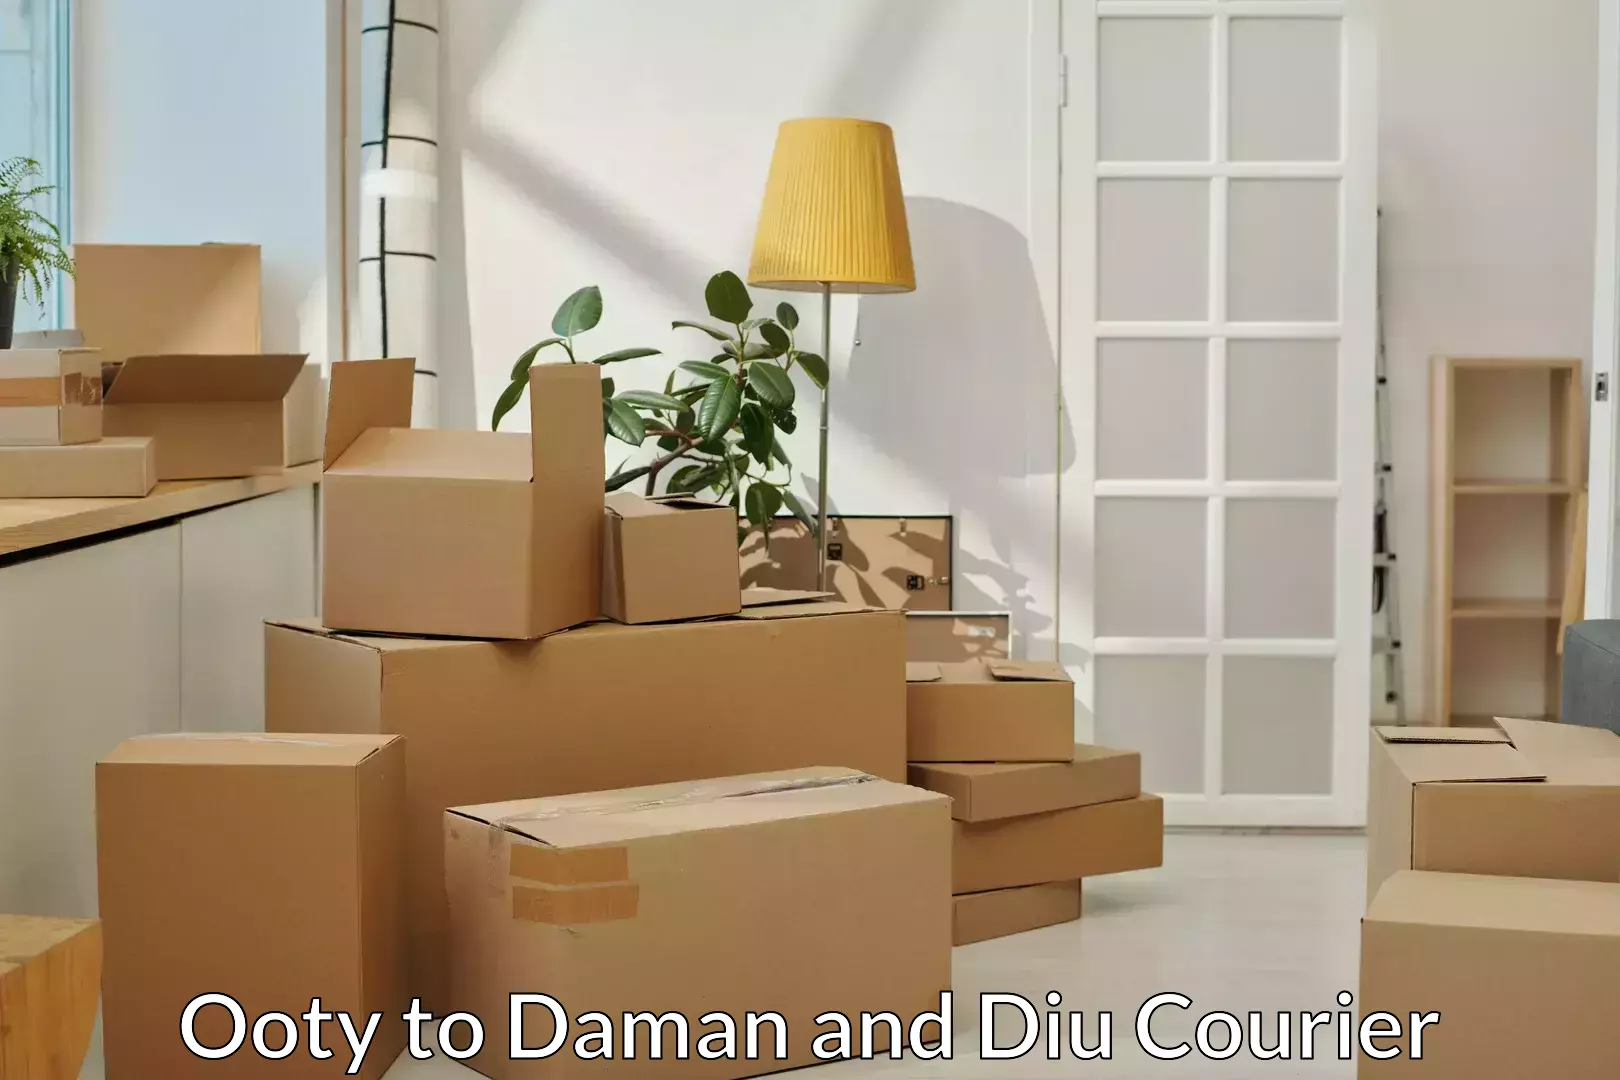 Trusted relocation experts Ooty to Daman and Diu